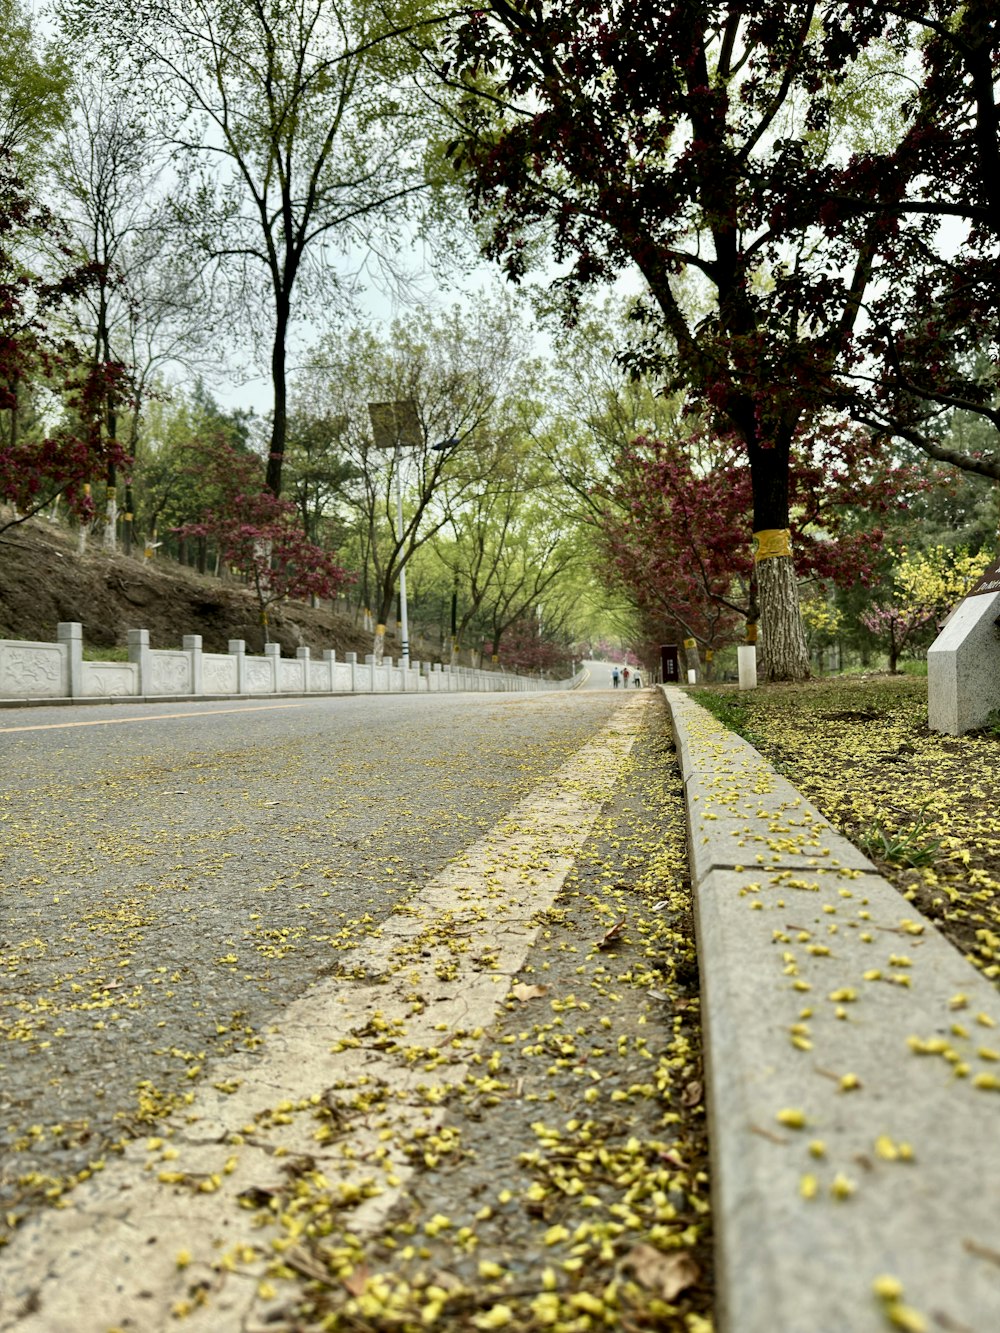 a street lined with trees and fallen leaves